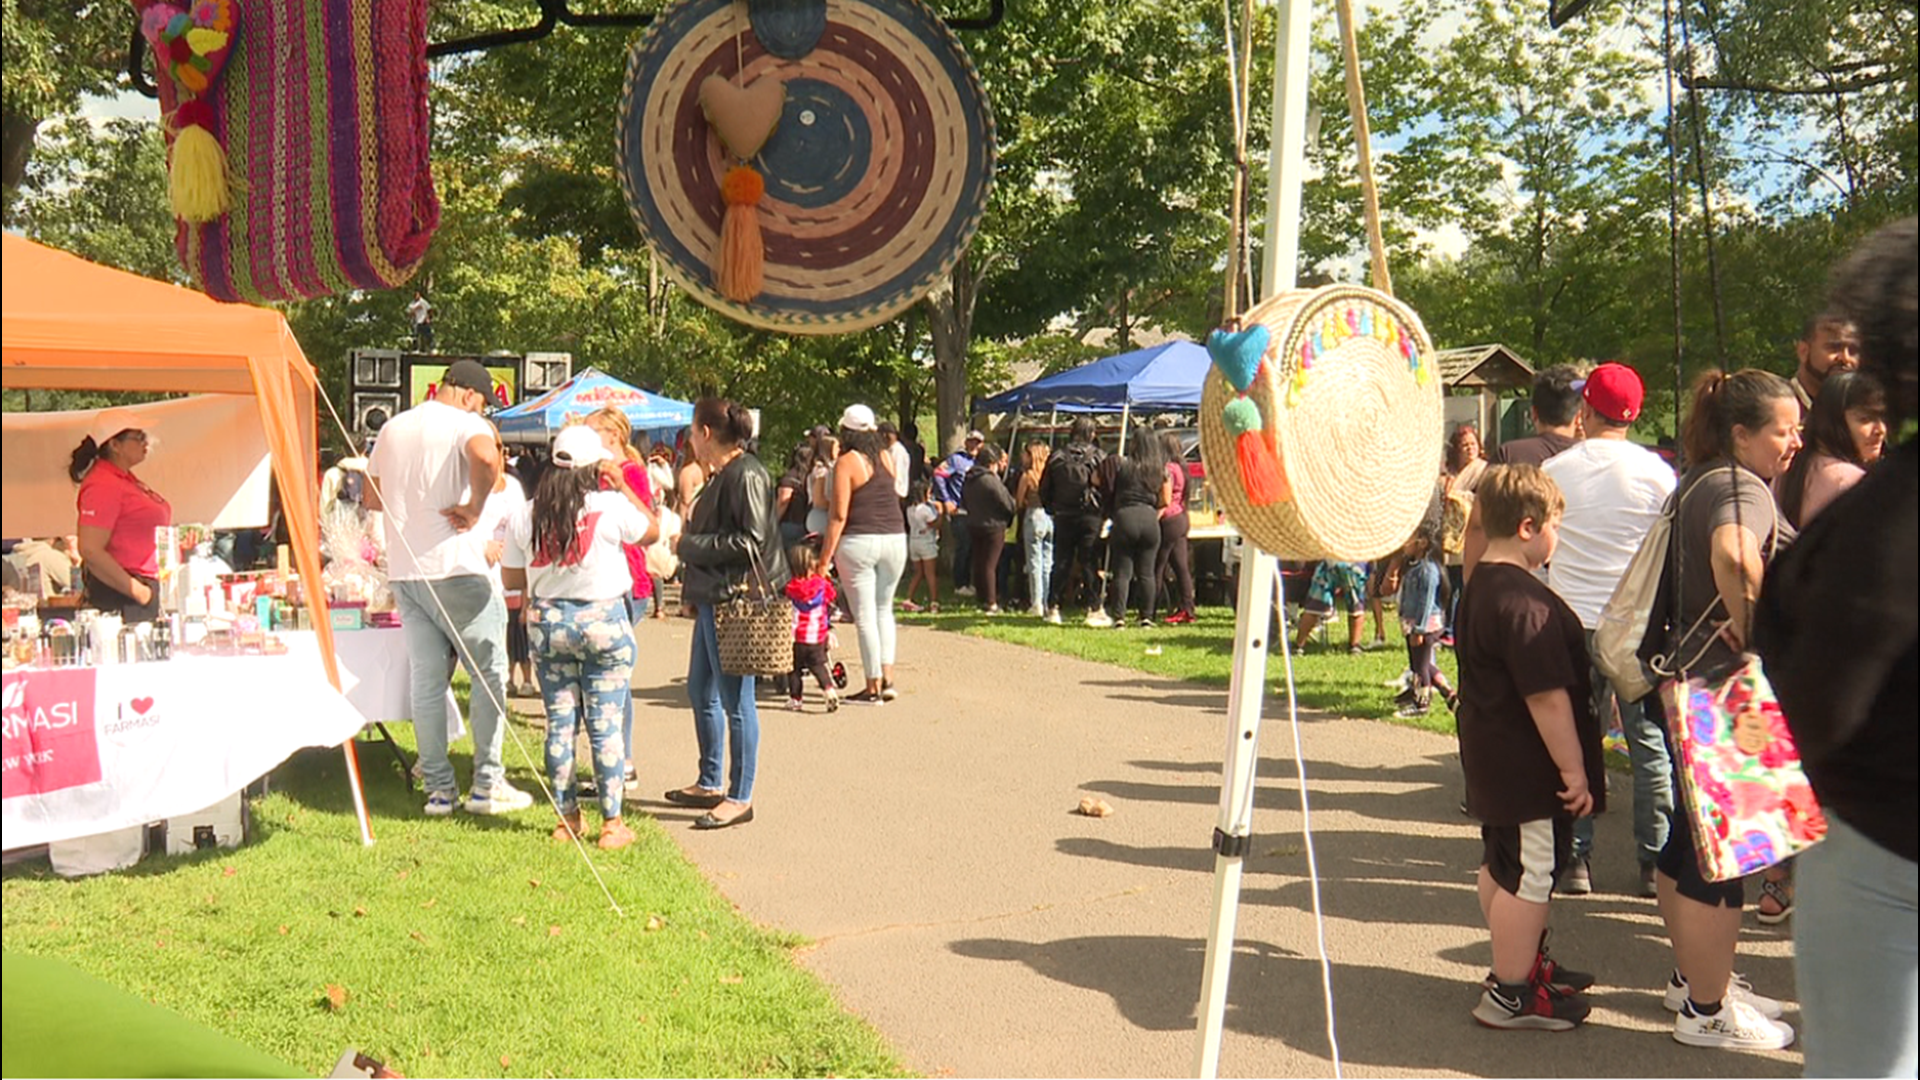 With a growing Hispanic population in Pennsylvania, many say there should be more Spanish festivals, but that Sunday's first annual in Wilkes-Barre was a good start.